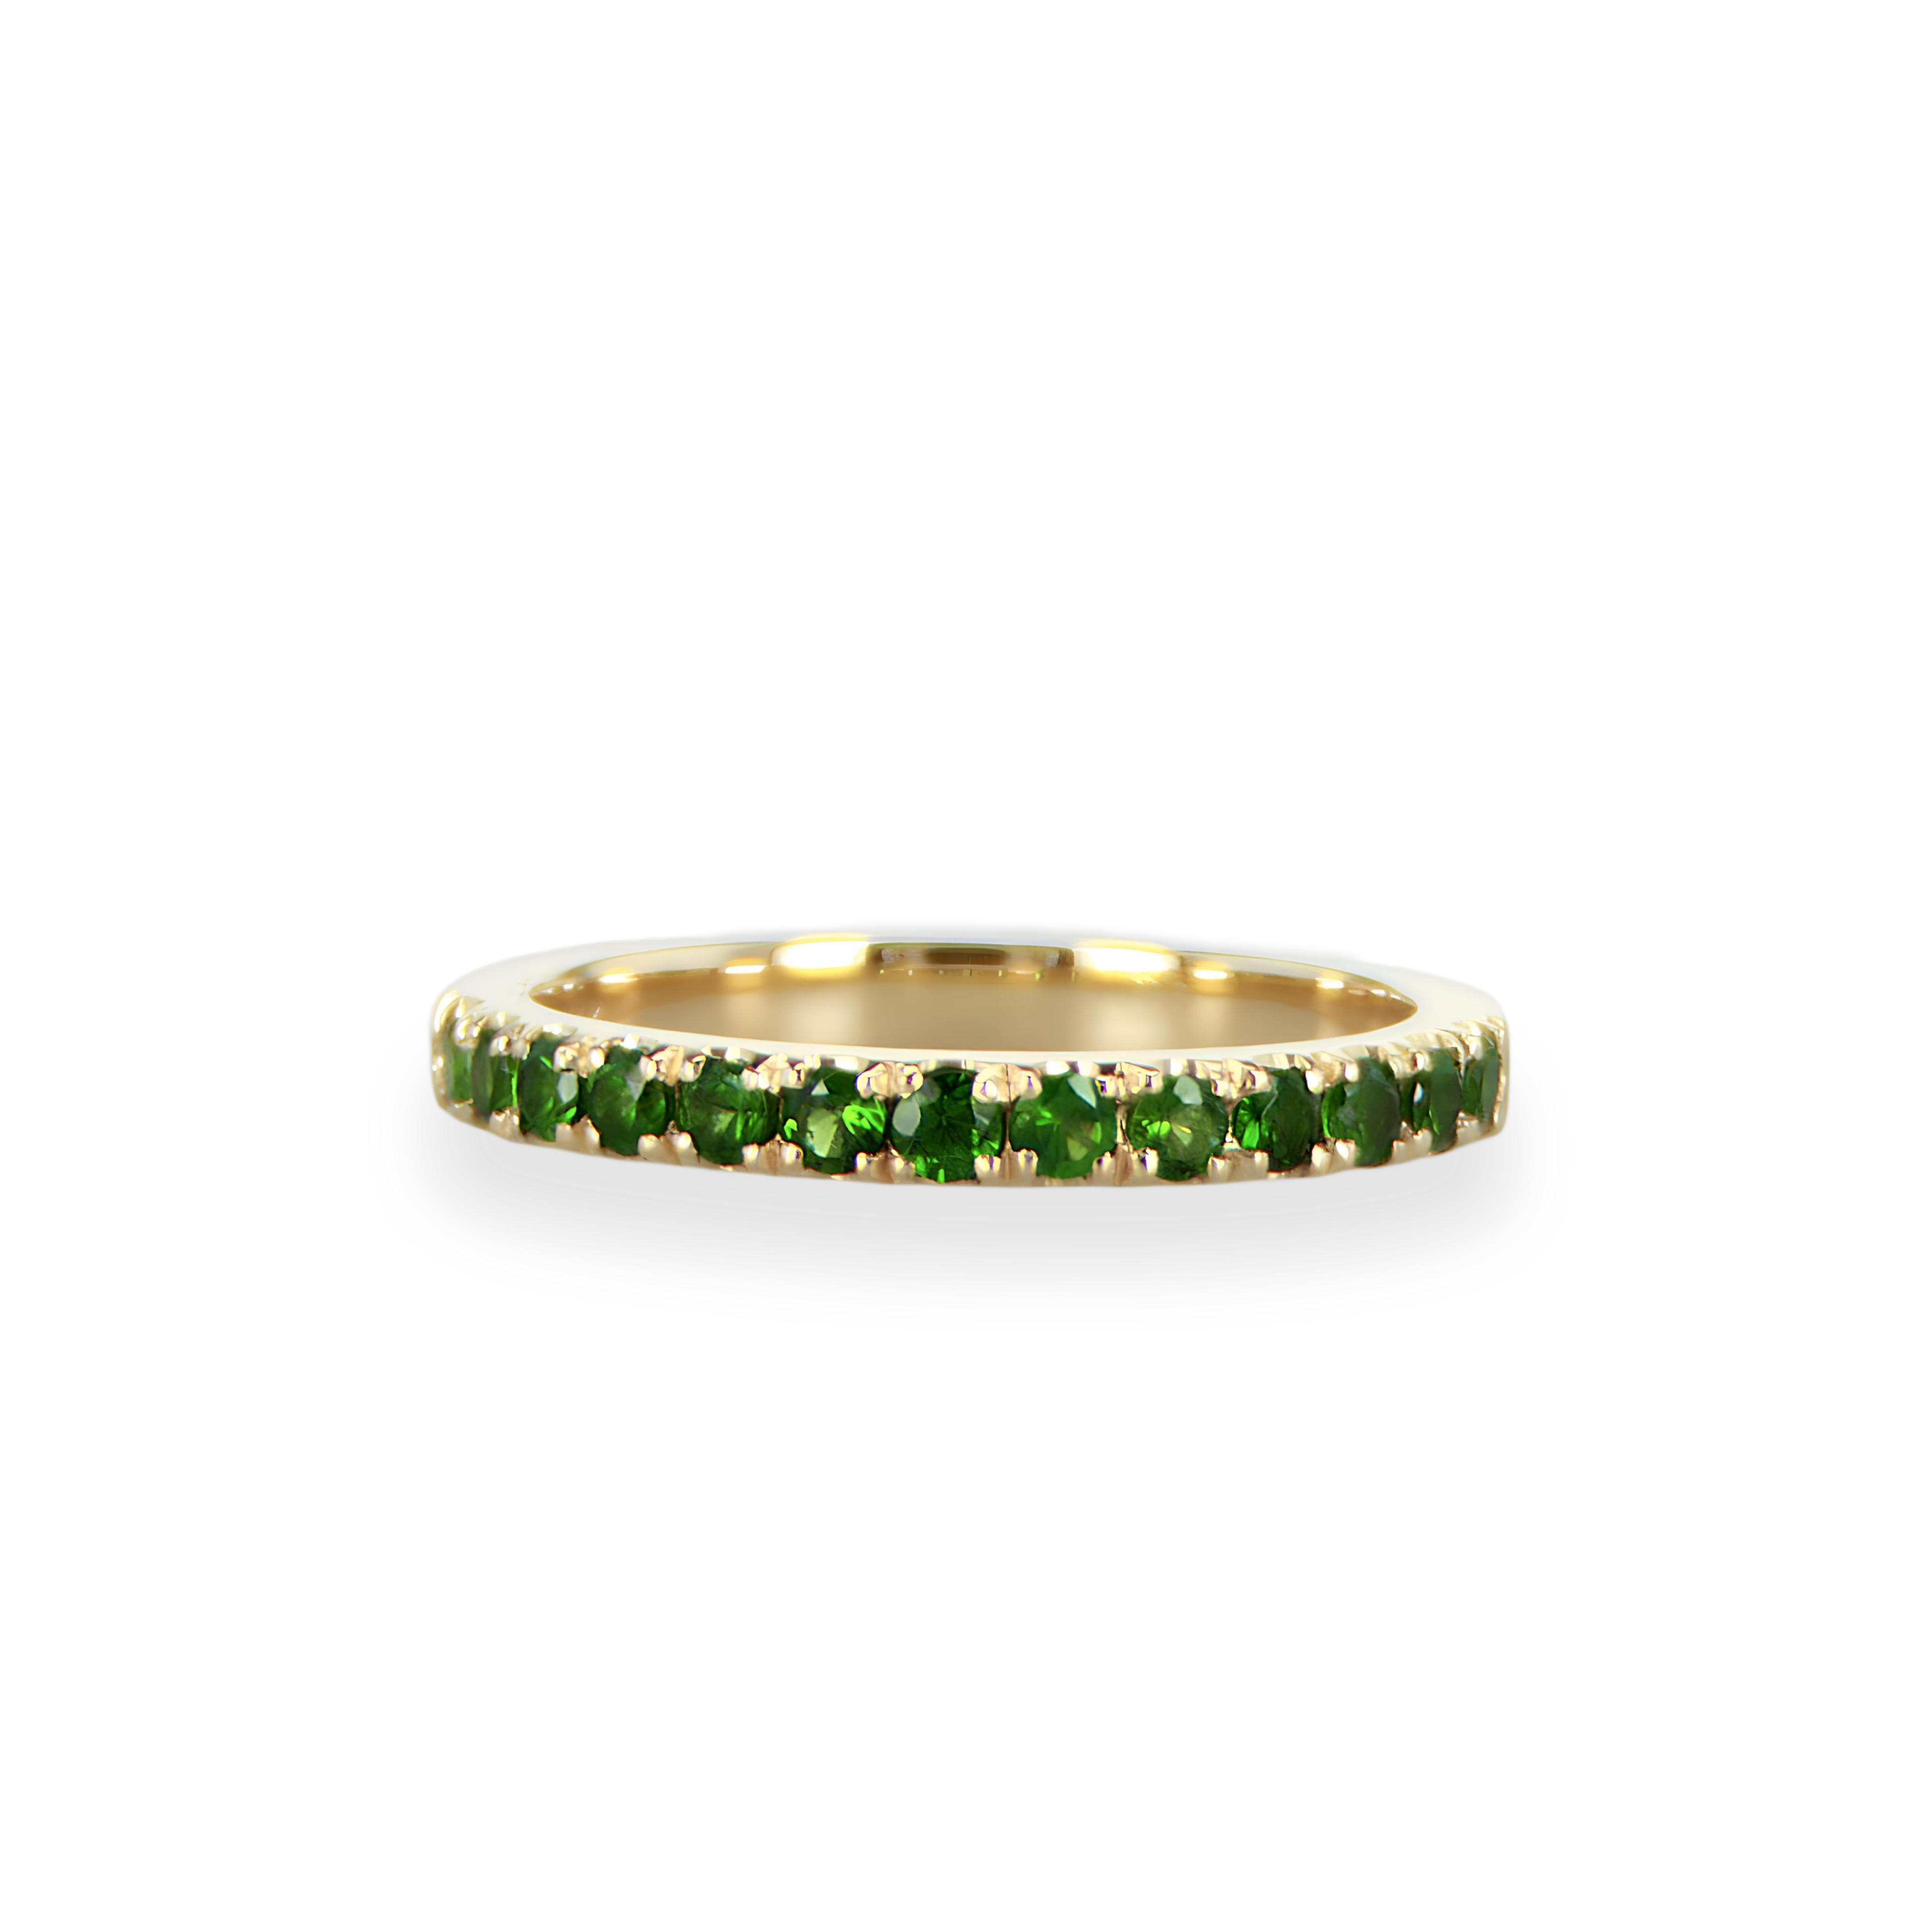 14K Yellow Gold 0.54Ct Natural Round Tsavorite Half Eternity Radiance Ring

Product Description:

Indulge in the symphony of luxury and rarity with our exquisite 0.54Ct Natural Round Tsavorite Half Eternity Ring, meticulously crafted in premium 14K